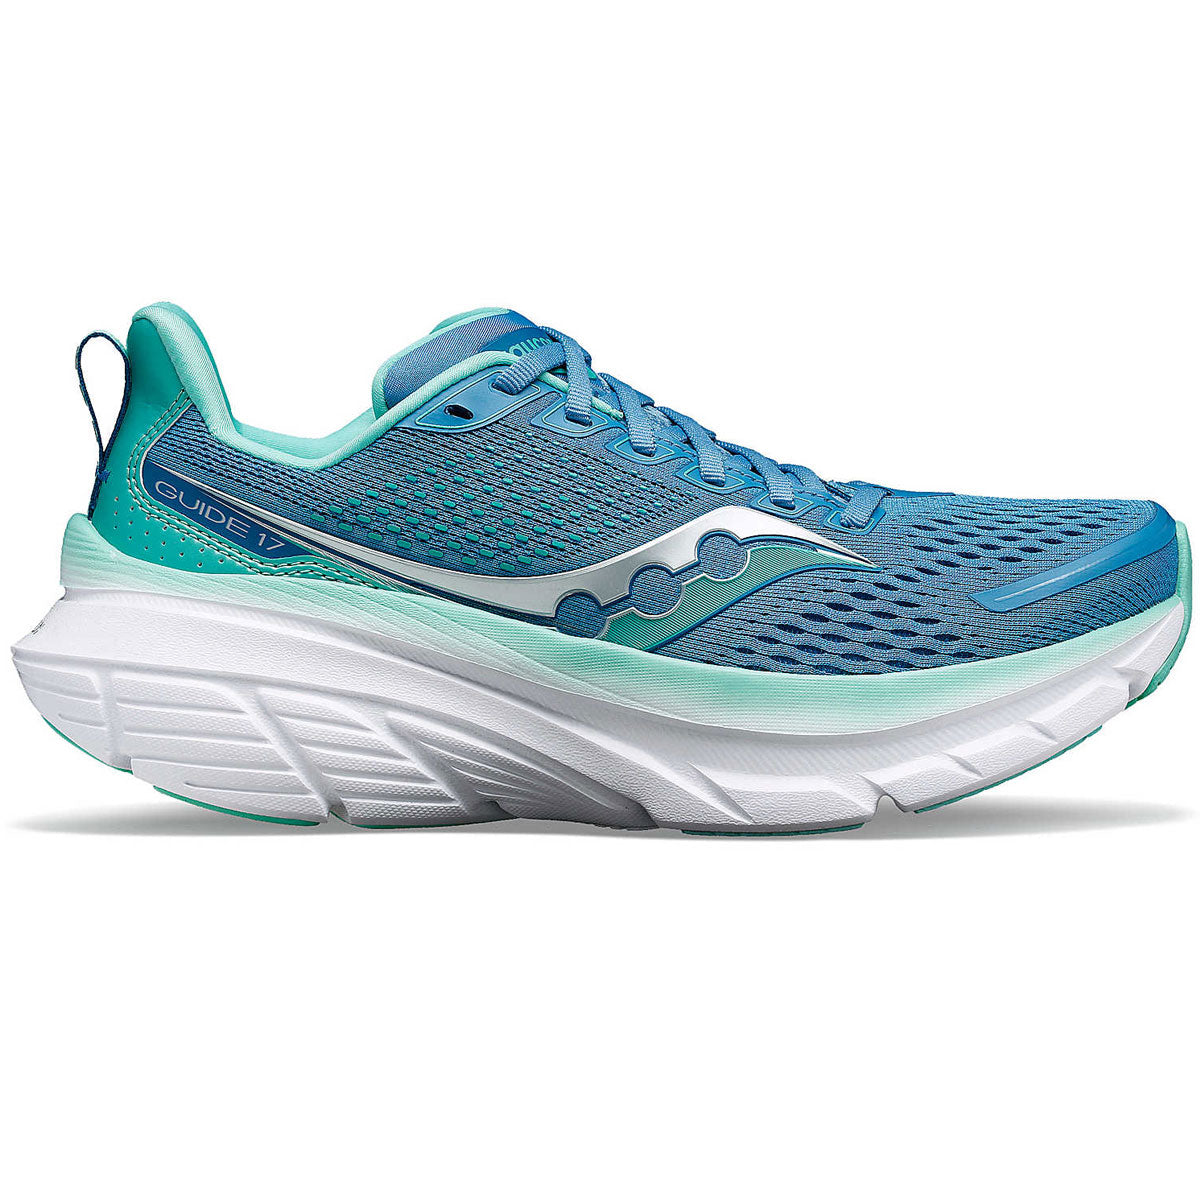 Saucony Guide 17 Running Shoes - Womens - Breeze/Mint